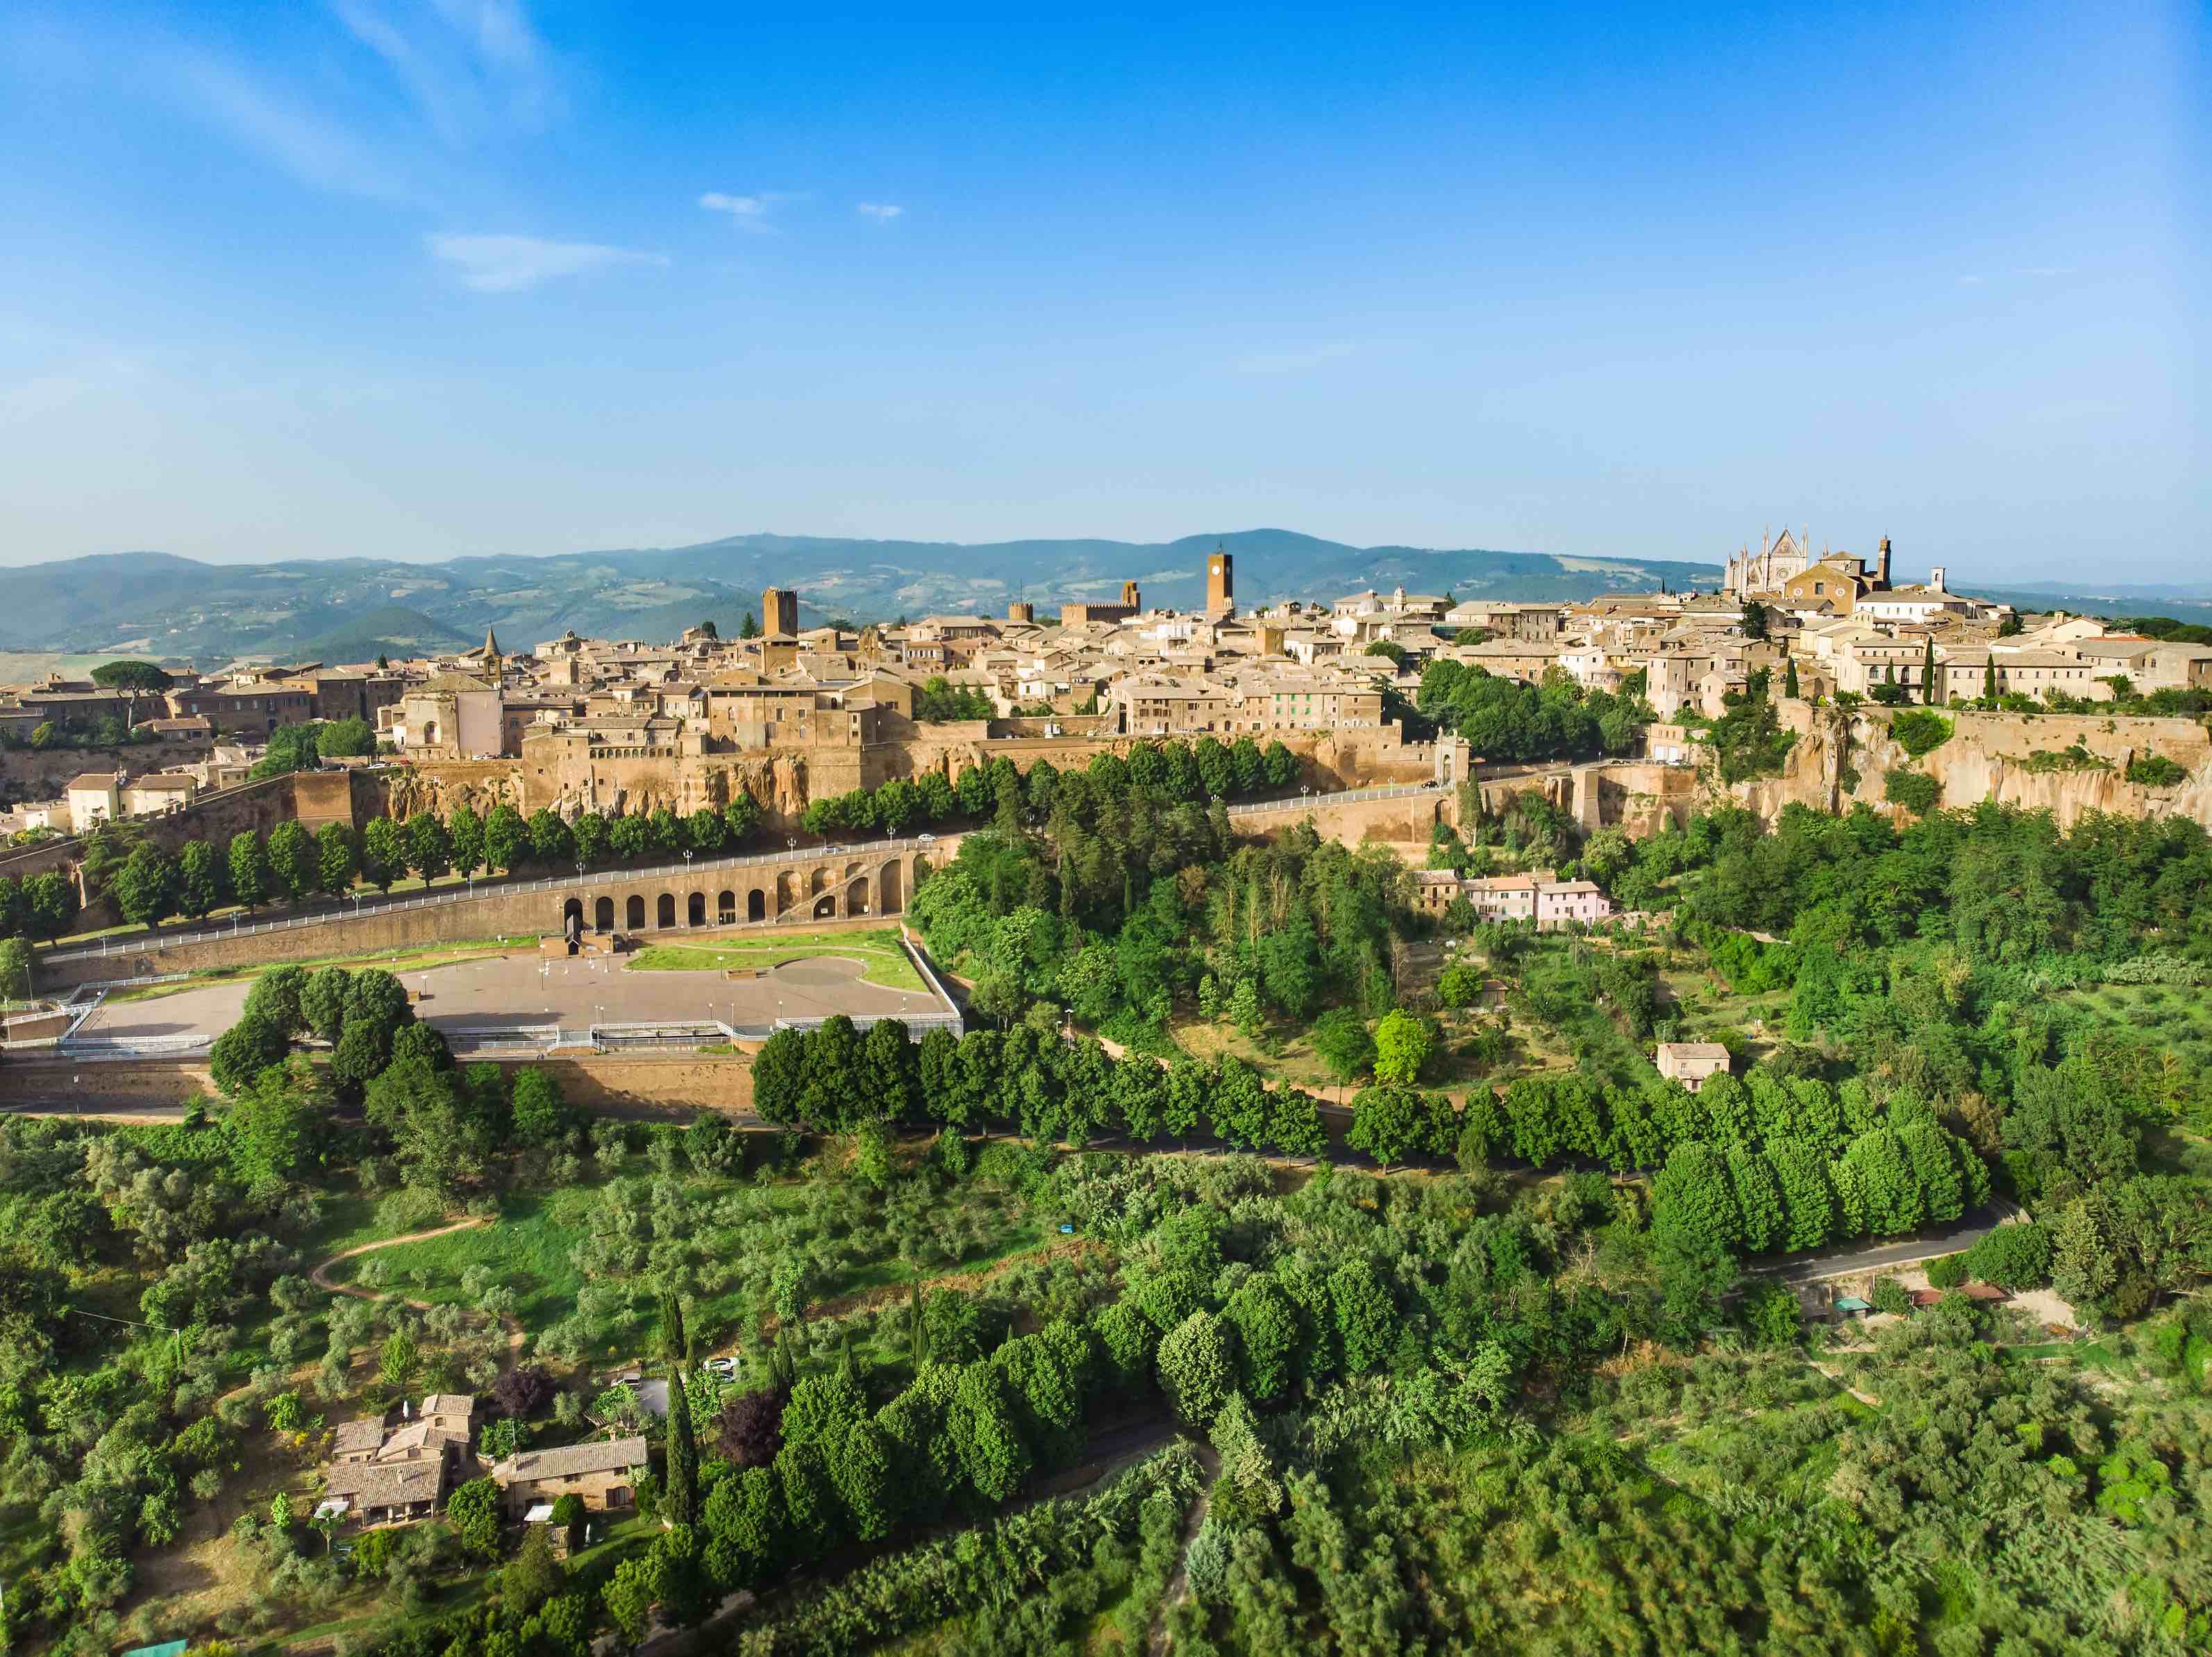 Aerial view of the famed Orvieto, a medieval hill town, rising above the almost vertical faces of tuff cliffs